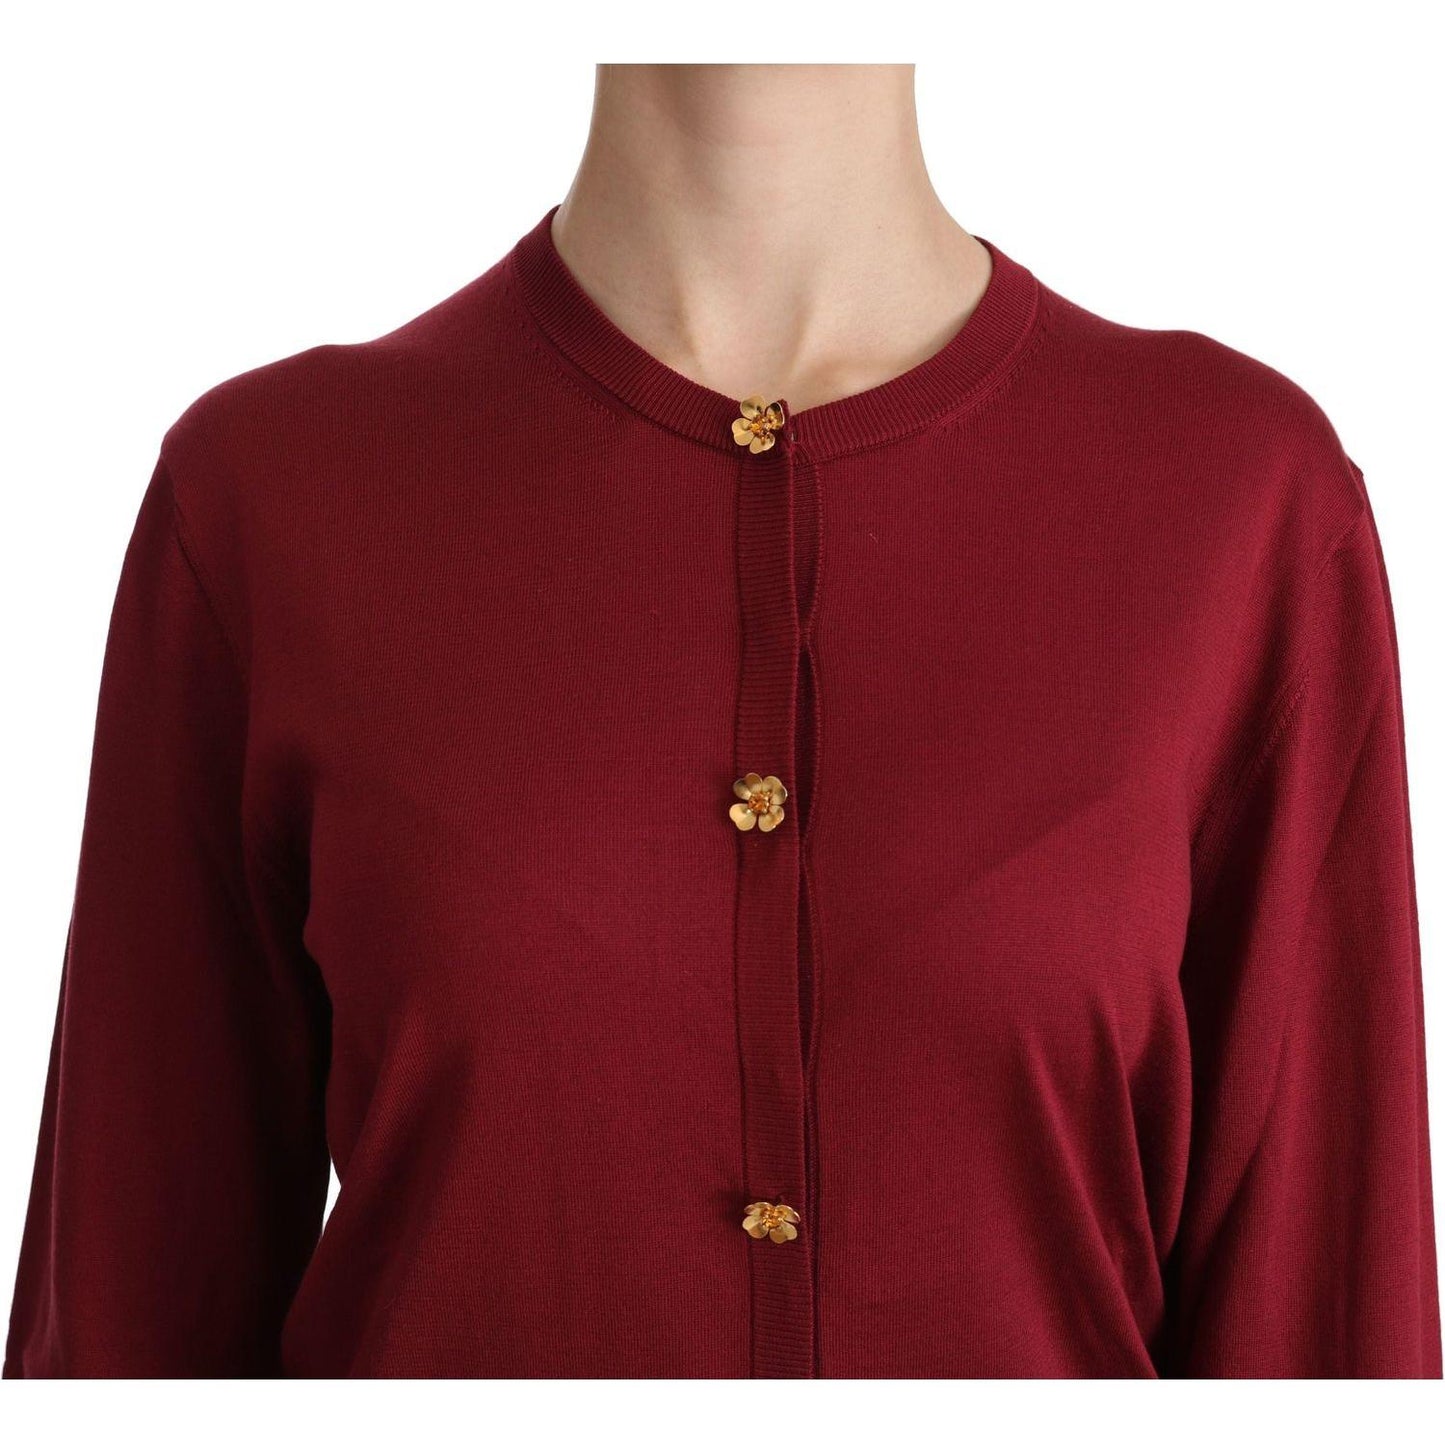 Dolce & Gabbana Silk Red Cardigan Top with Button Accents red-silk-long-sleeve-cardigan-sweater